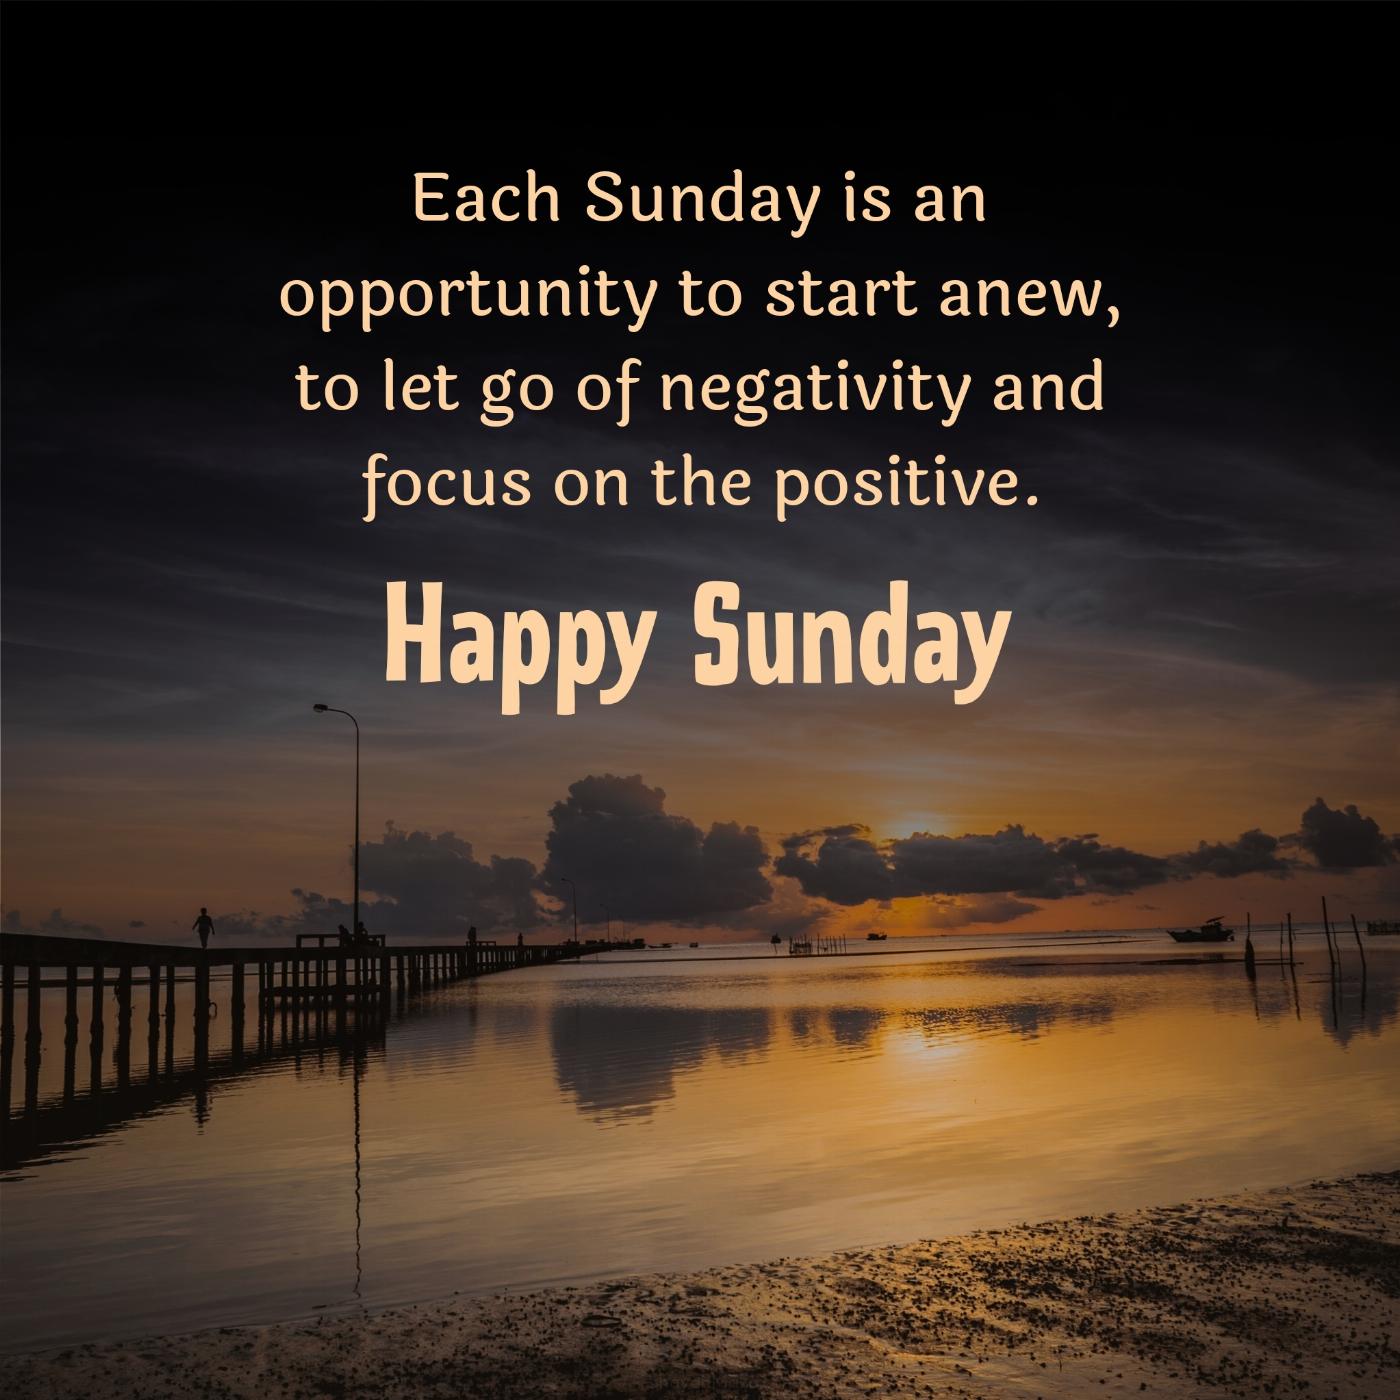 Each Sunday is an opportunity to start anew to let go of negativity